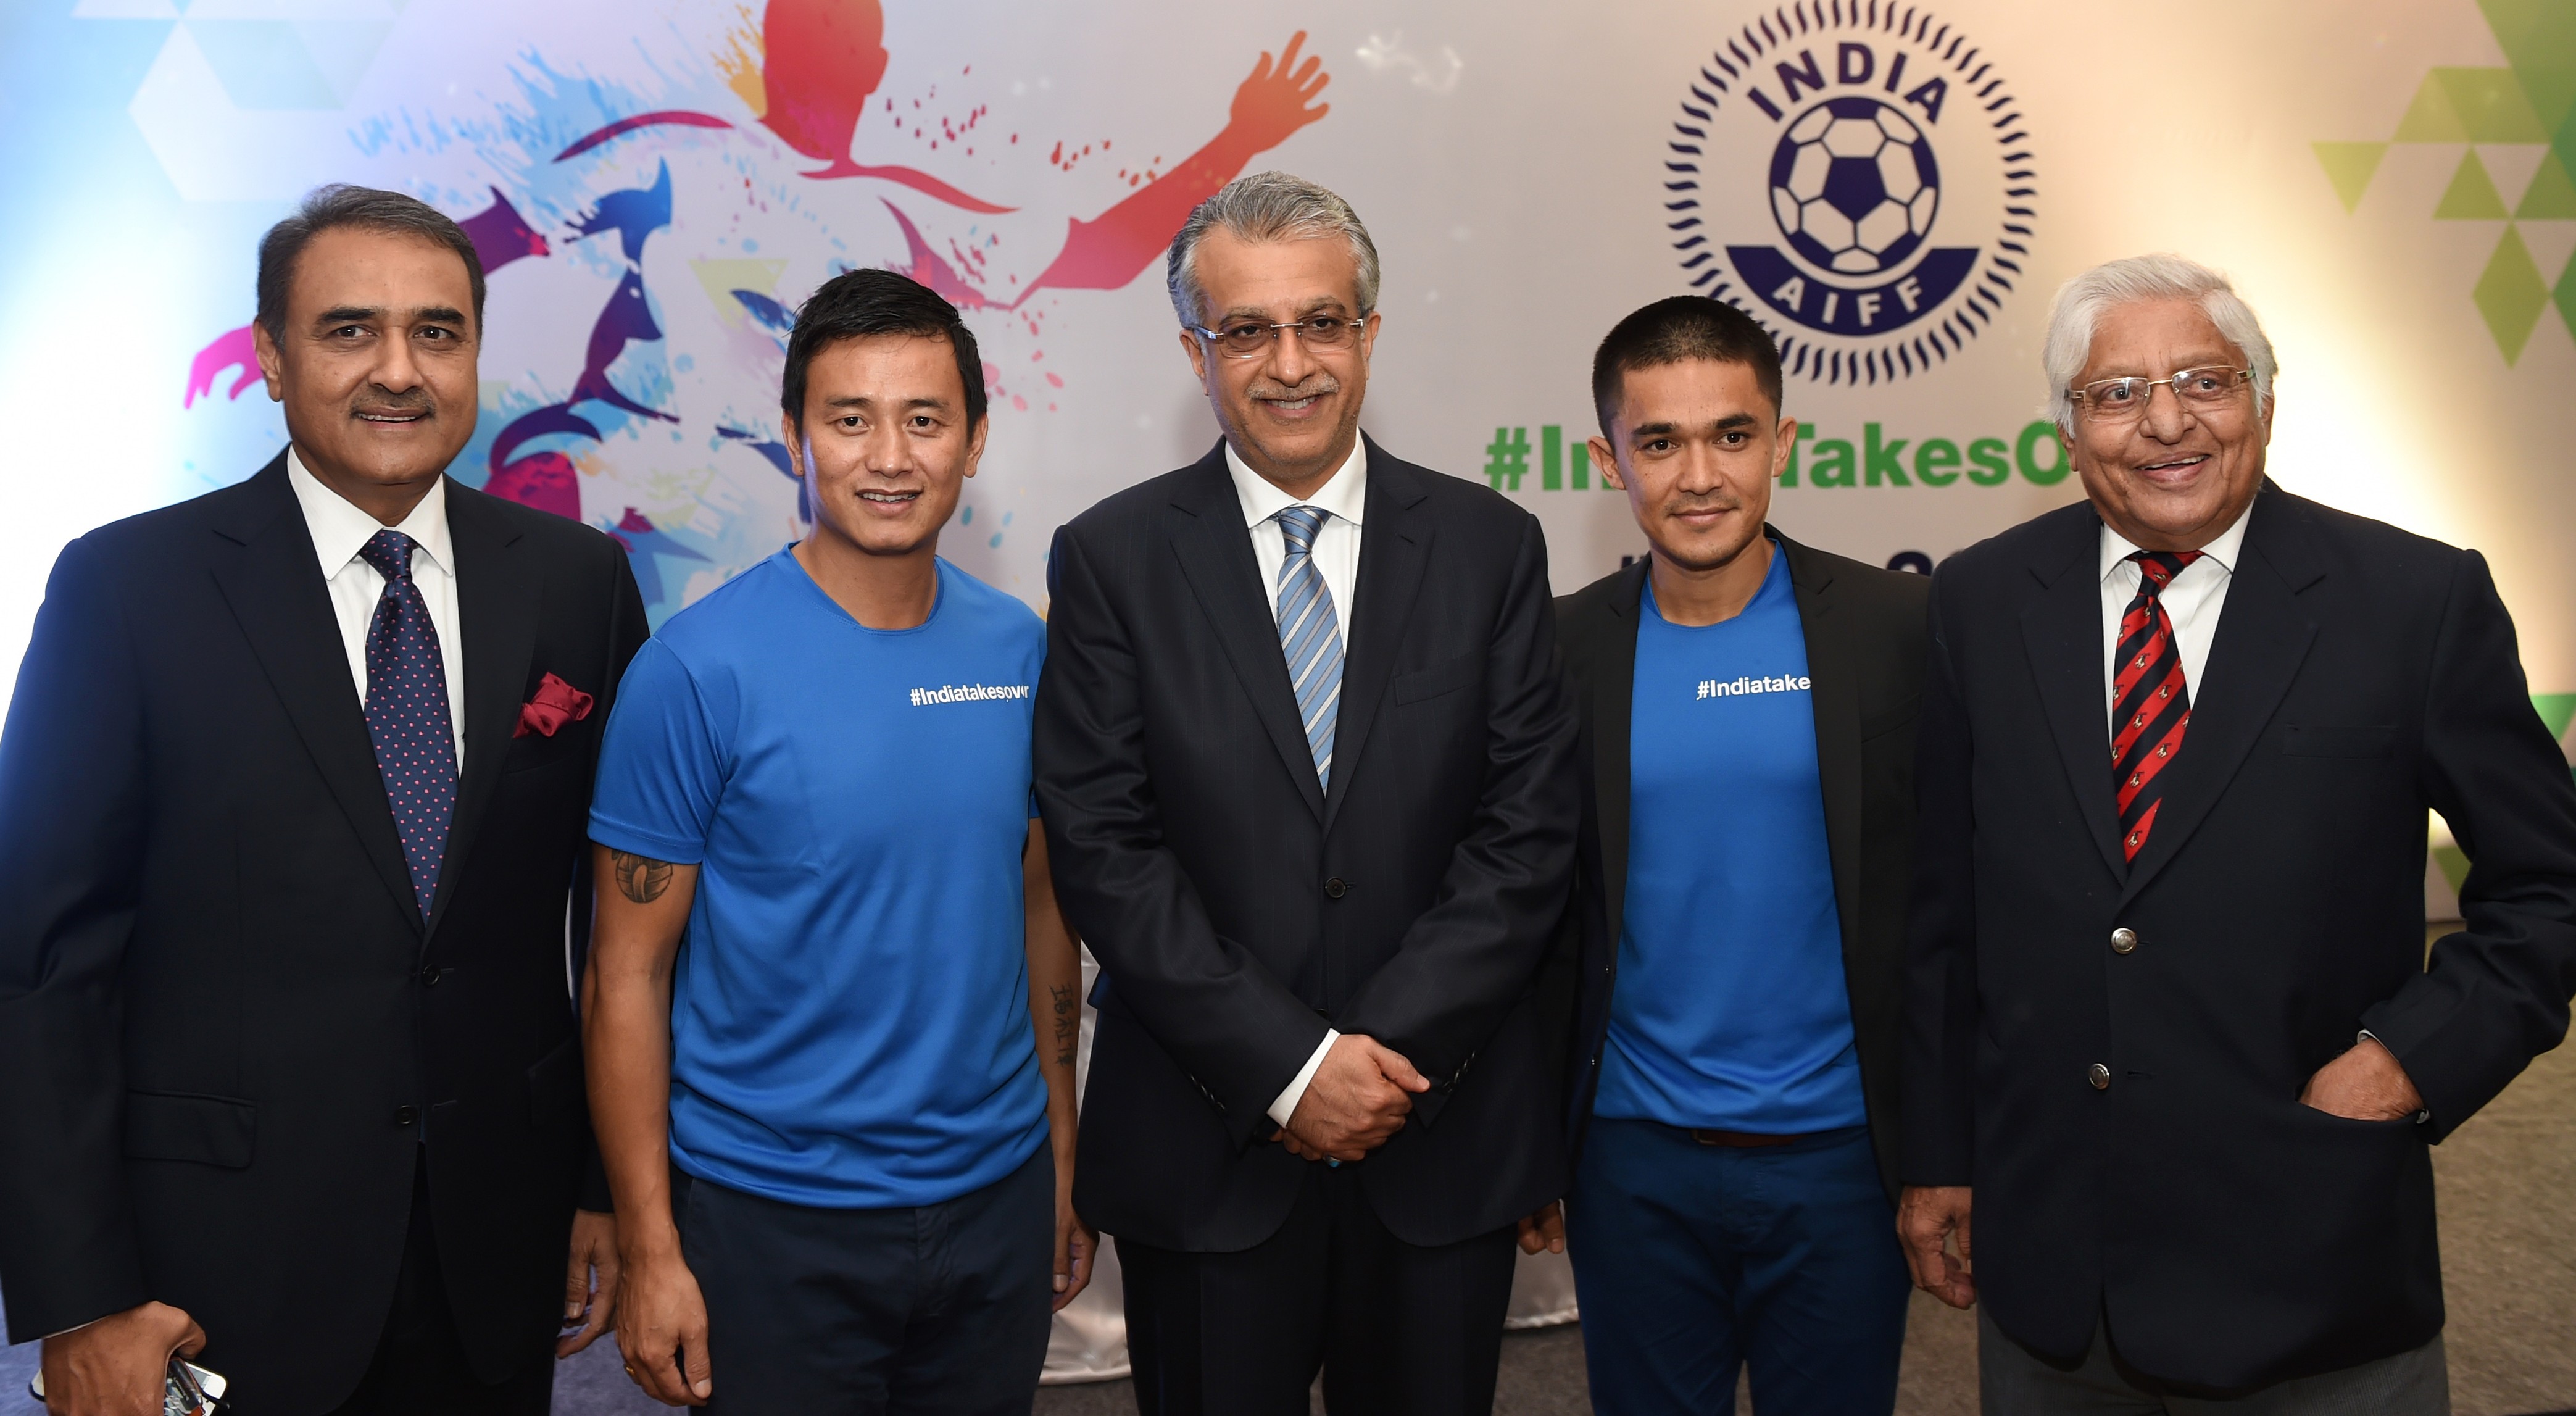 President of the All India Football Federation Praful Patel (L), former national team captain Baichung Bhutia (2L), the President of the Asian Football Confederation Shaikh Salman (C), Indian football team captain Sunil Chhetri (2R) and and former national team captain Chunni Goswami take part in the launch of the FIFA Under-17 World Cup in New Delhi on November 28, 2015. AFP PHOTO / SAJJAD HUSSAIN / AFP / SAJJAD HUSSAIN        (Photo credit should read SAJJAD HUSSAIN/AFP/Getty Images)